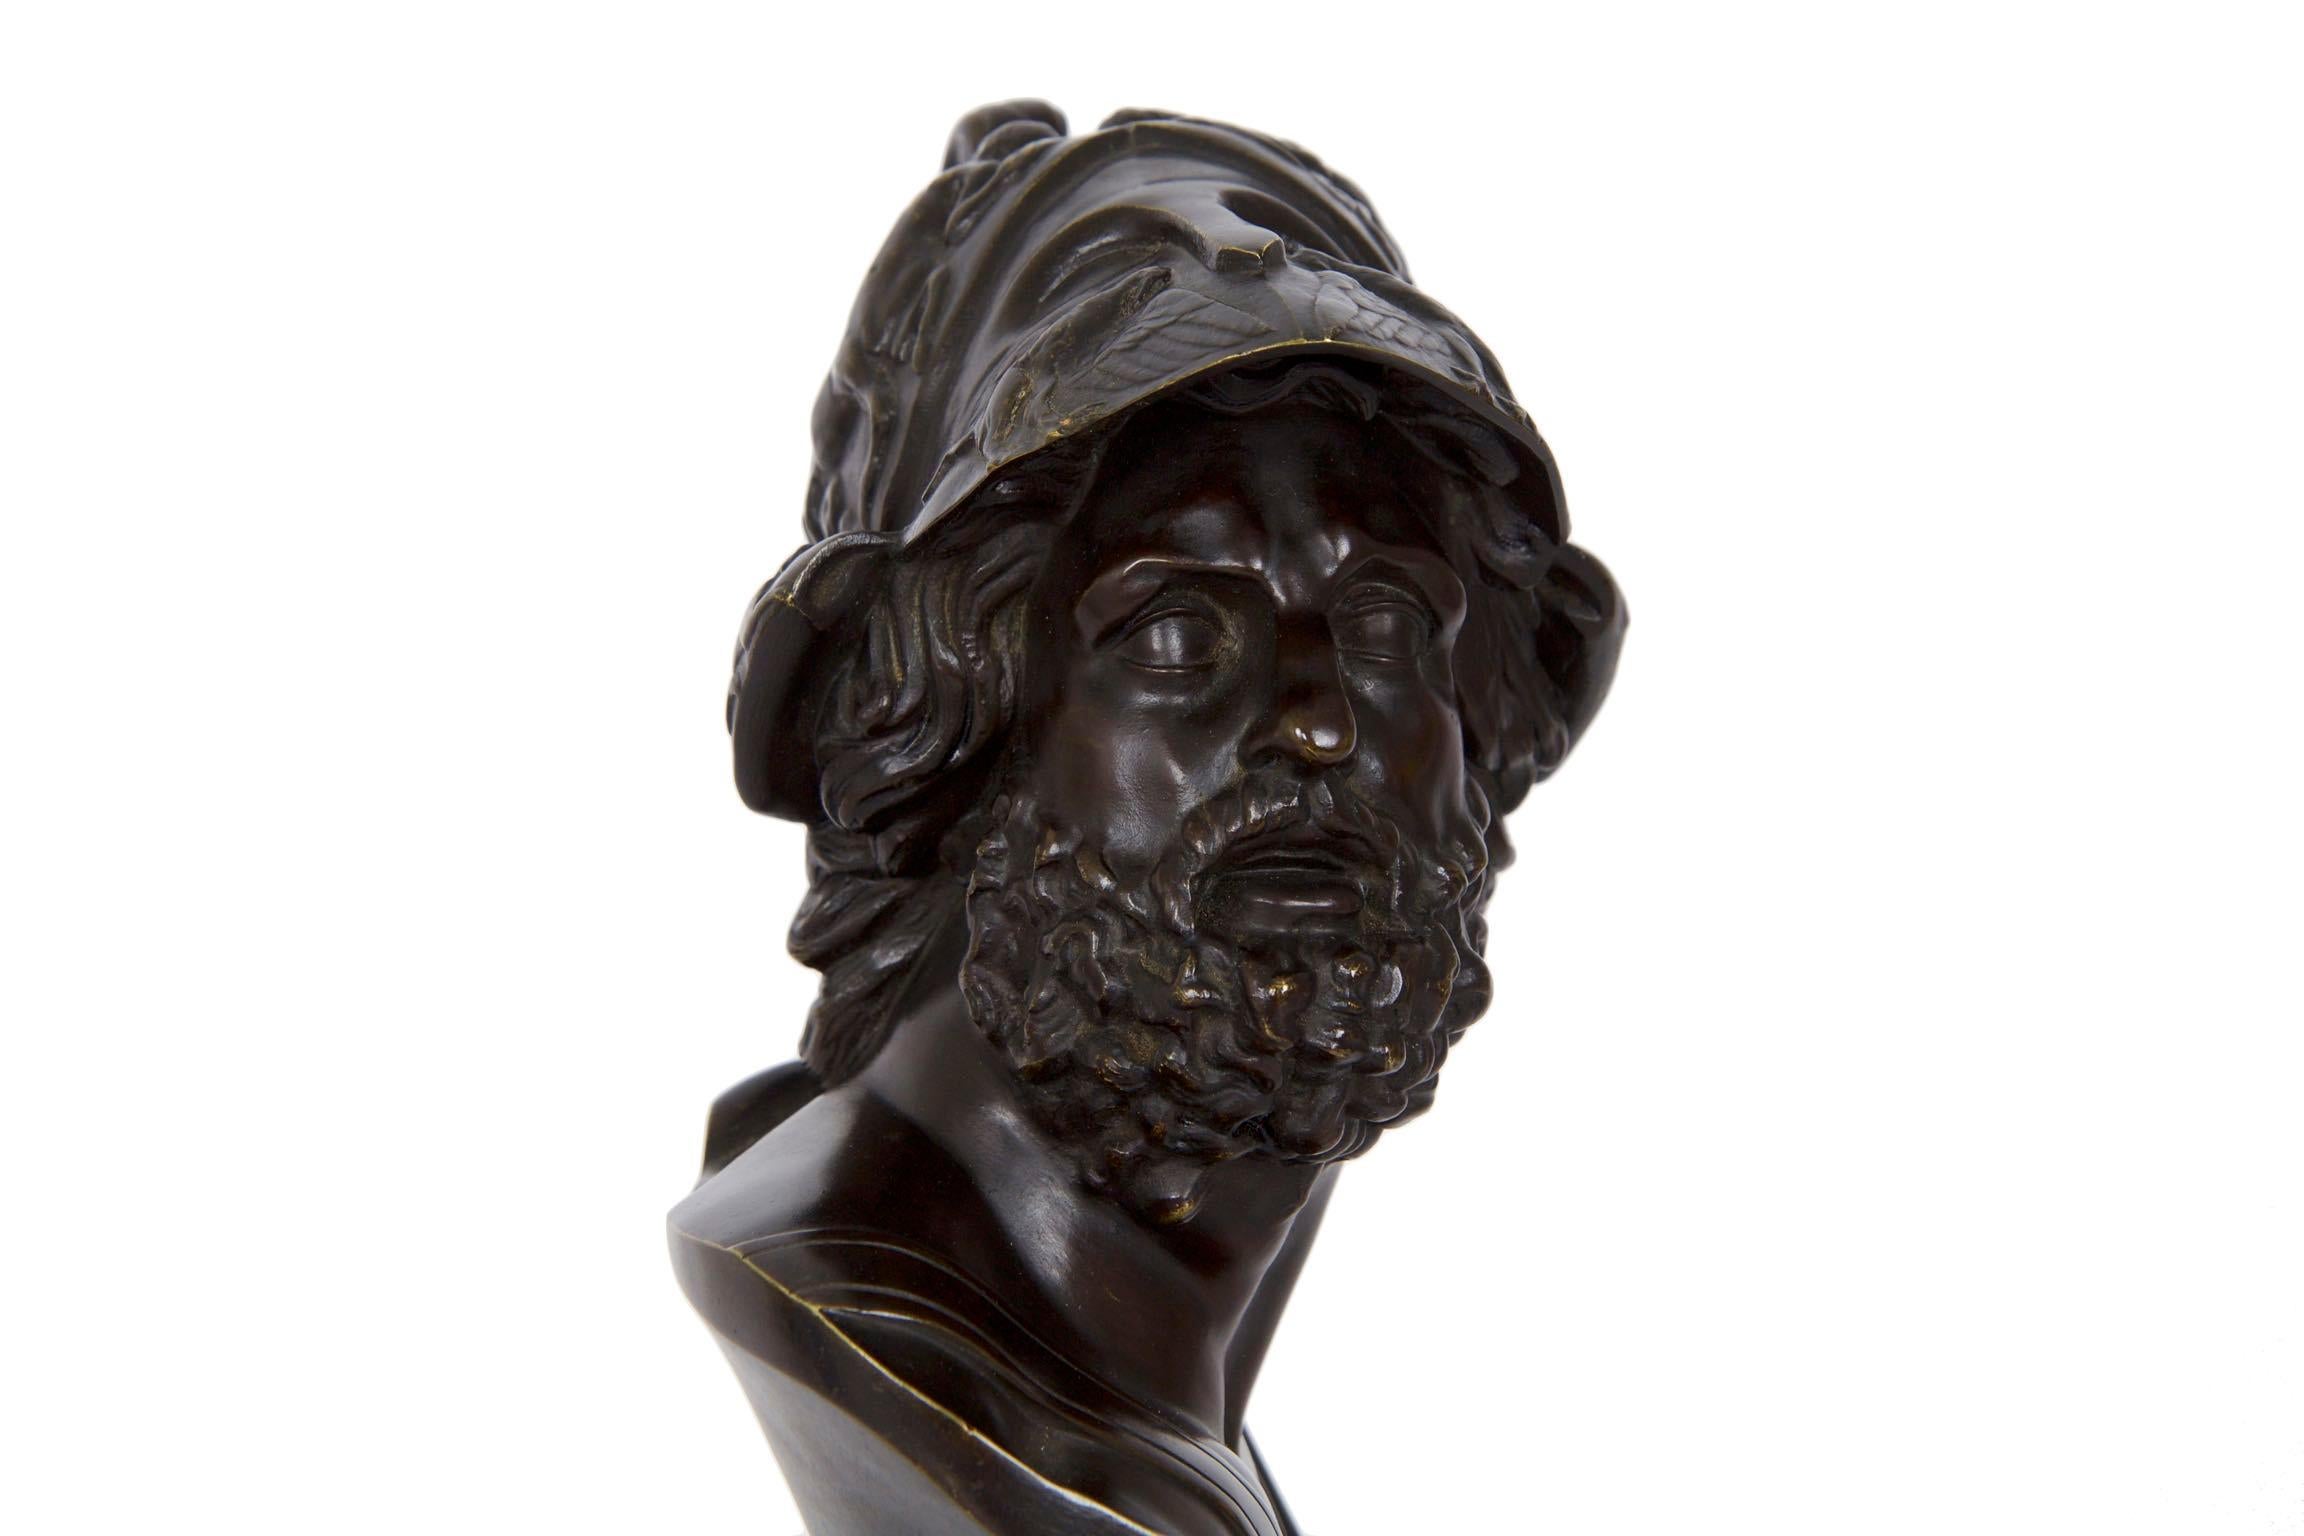 19th Century French Antique Bronze Bust Sculpture of General Ajax or Menelaus 1